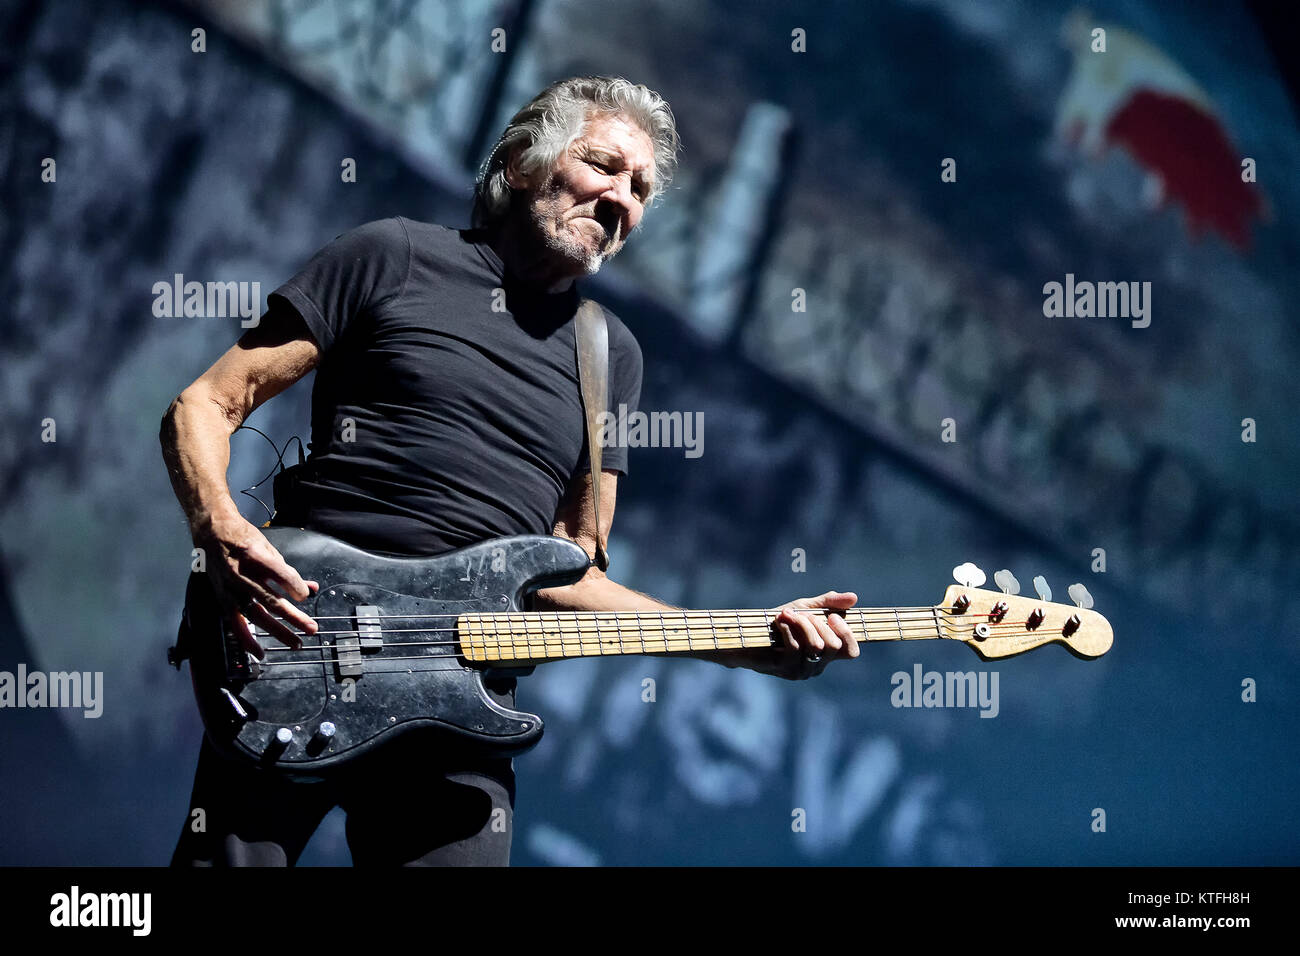 The British singer, songwriter and musician Roger Waters performs a live concert at Telenor Arena in Oslo. Roger Waters is well known as the co-founder and band member of the progressive rock band Pink Floyd. Norway, 14/08 2013. Stock Photo